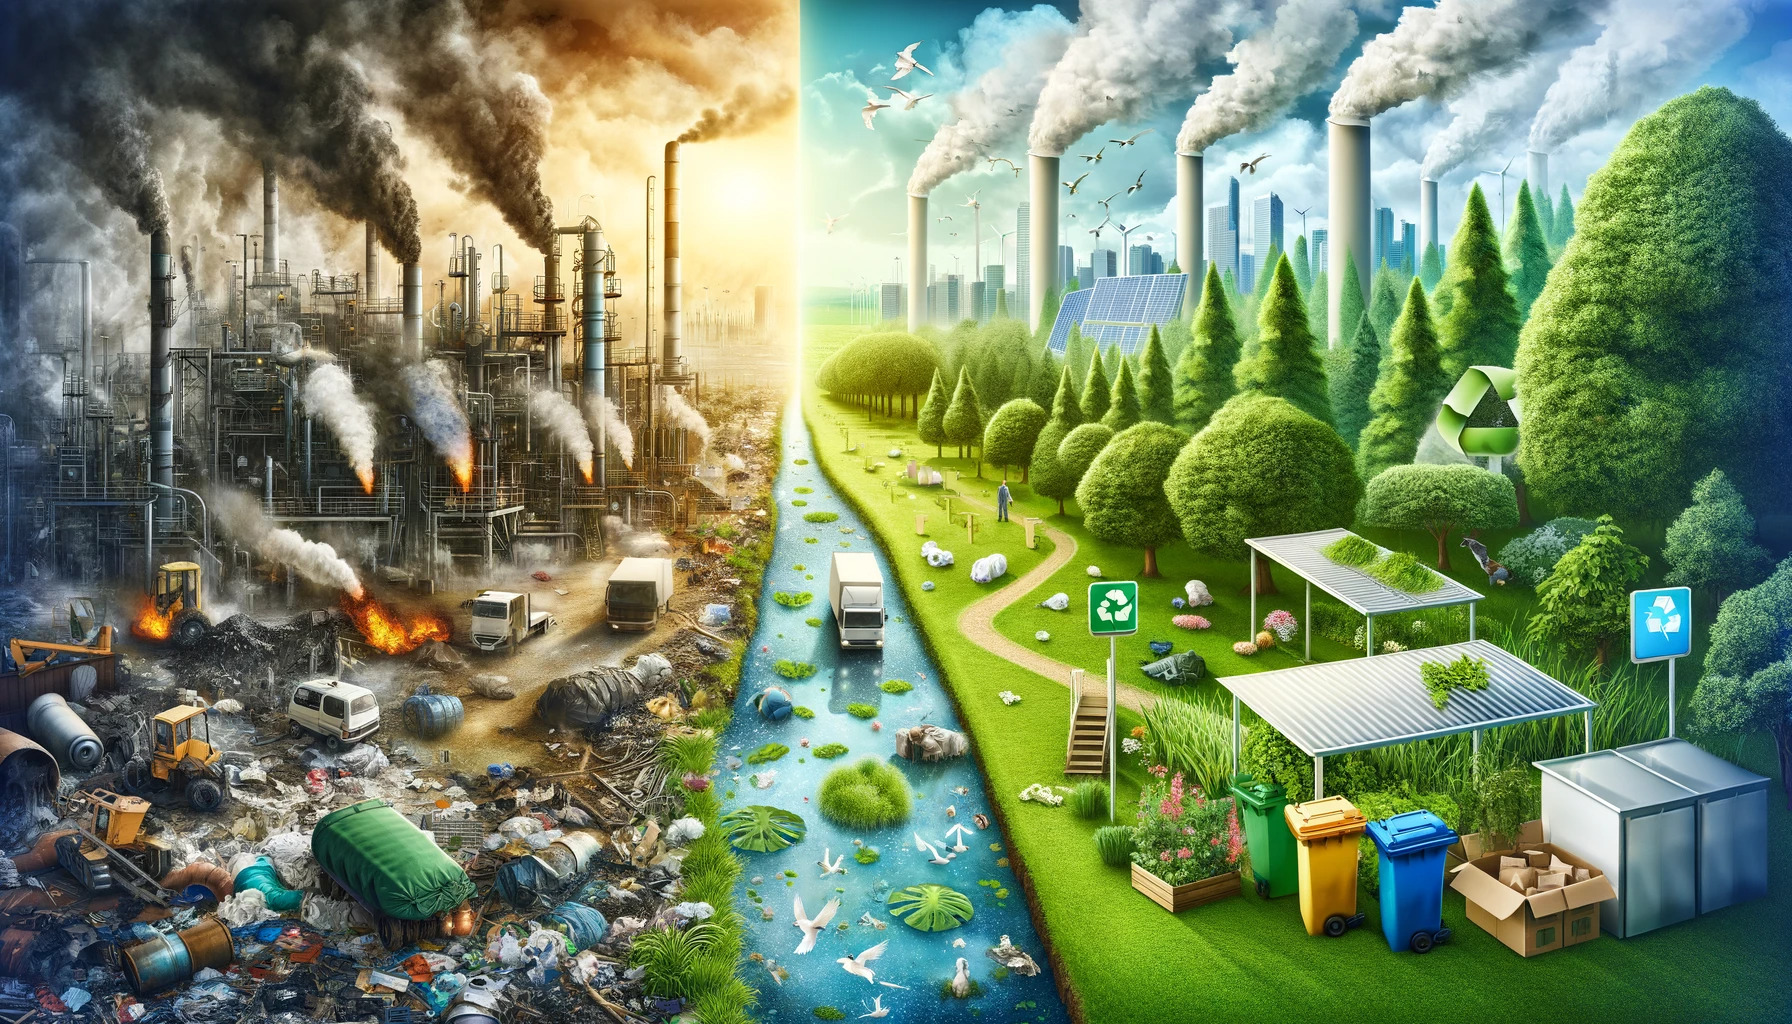 ENVIRONMENTAL POLLUTION AND SUSTAINABLE SOLUTIONS